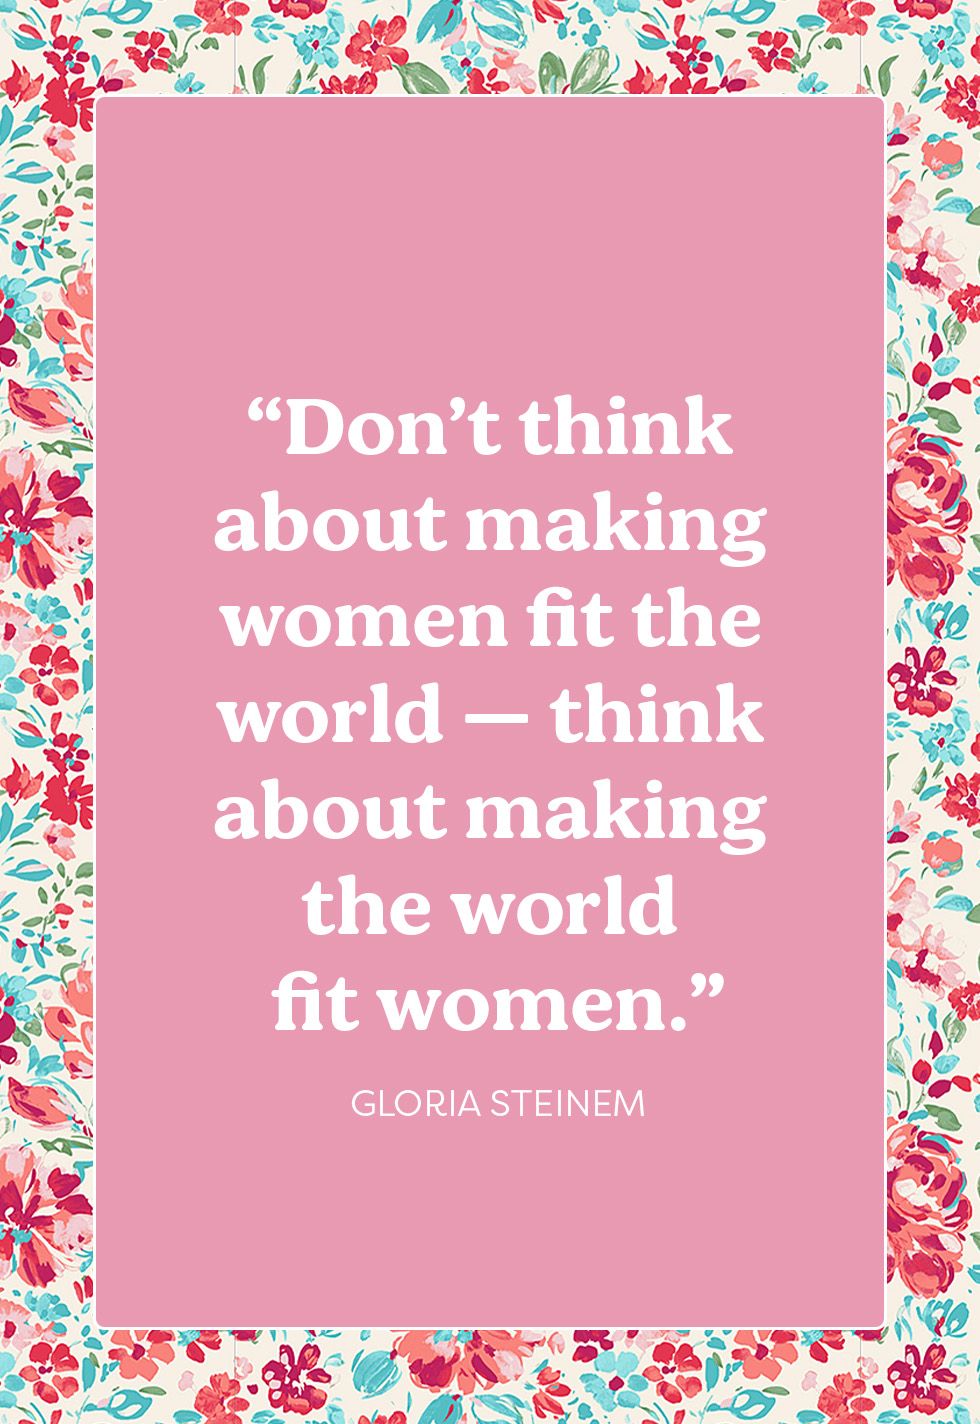 65 International Women's Day Quotes to Share in 2024